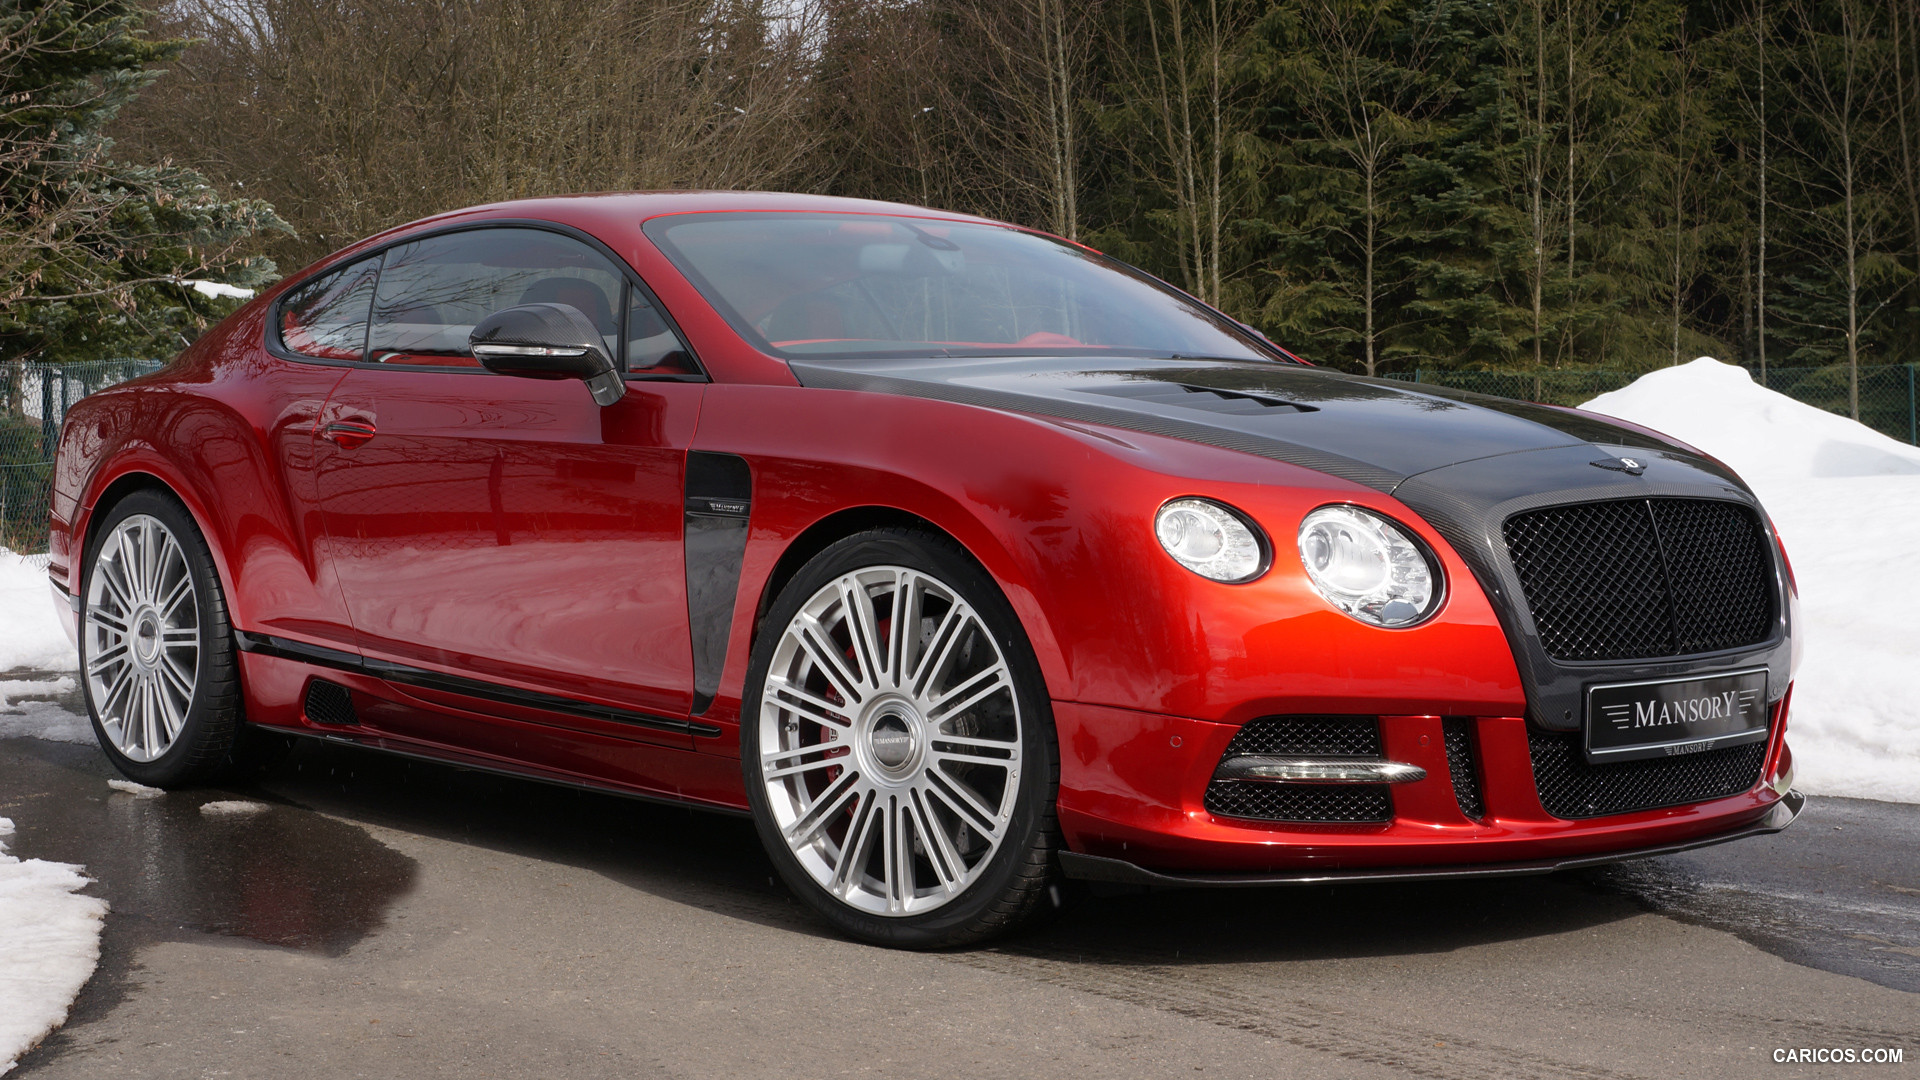 2013 Mansory Sanguis based on Bentley Continental GT  - Front, #1 of 7